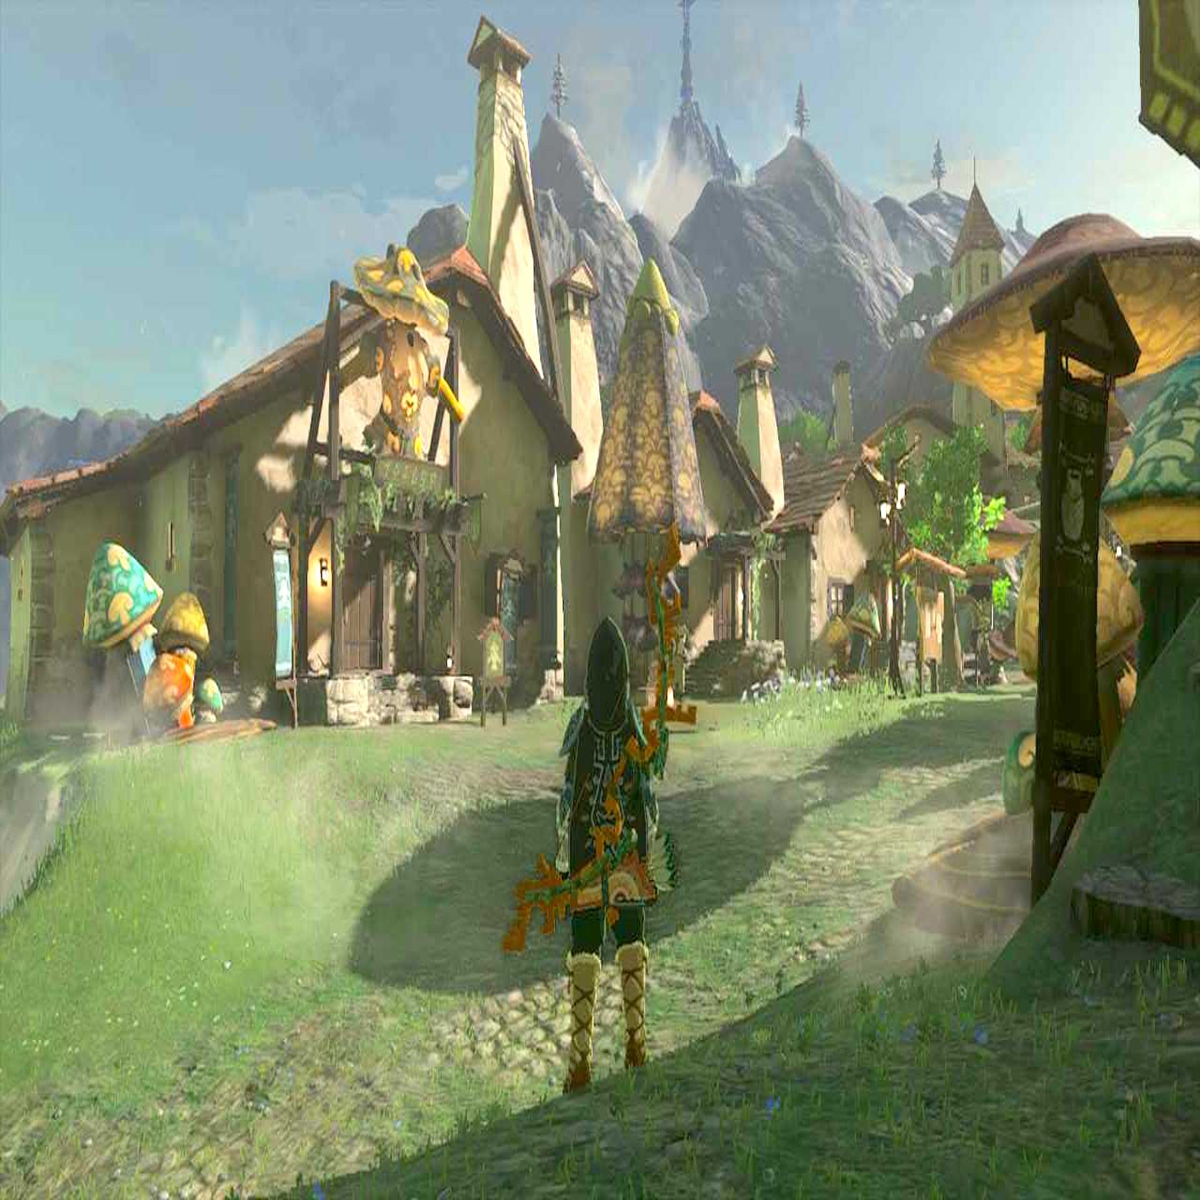 Where to find Hateno Village in Zelda Tears of the Kingdom